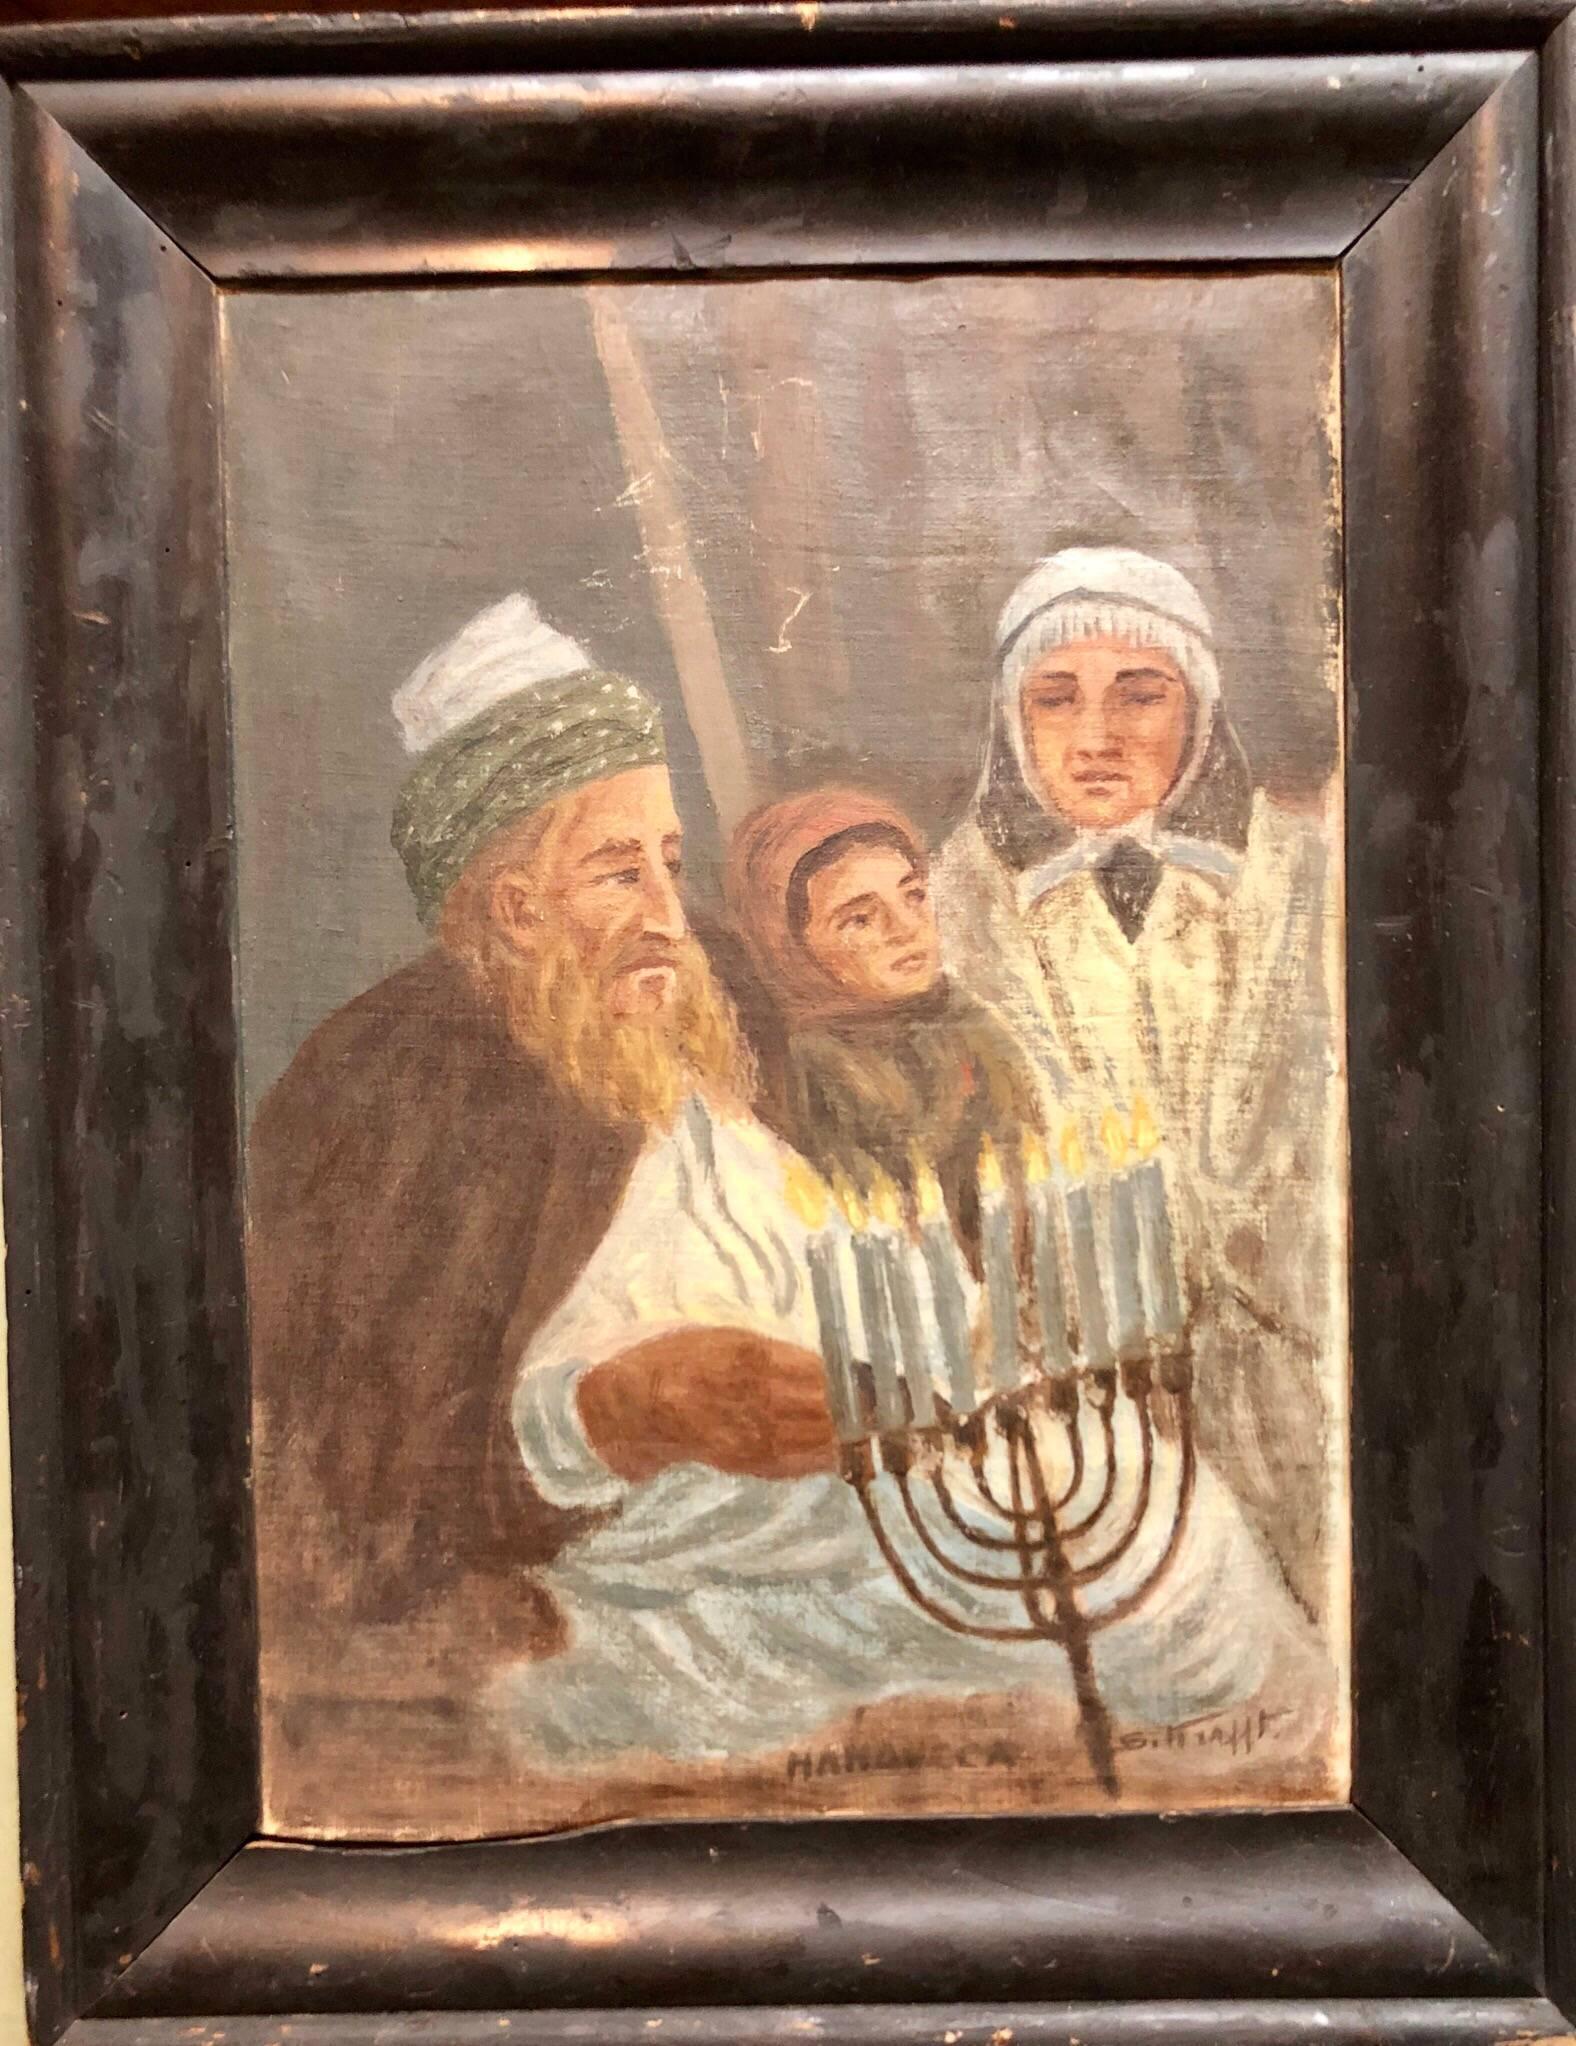 Rare Judaica Art, A World War II era, German or French Judaic painting. A family lighting the menorah the eighth day of the holiday.  Bears remnants of old gothis German print on the back. Signed S. Krafft and tited Hanoucca (Hanukkah or Chanukah)